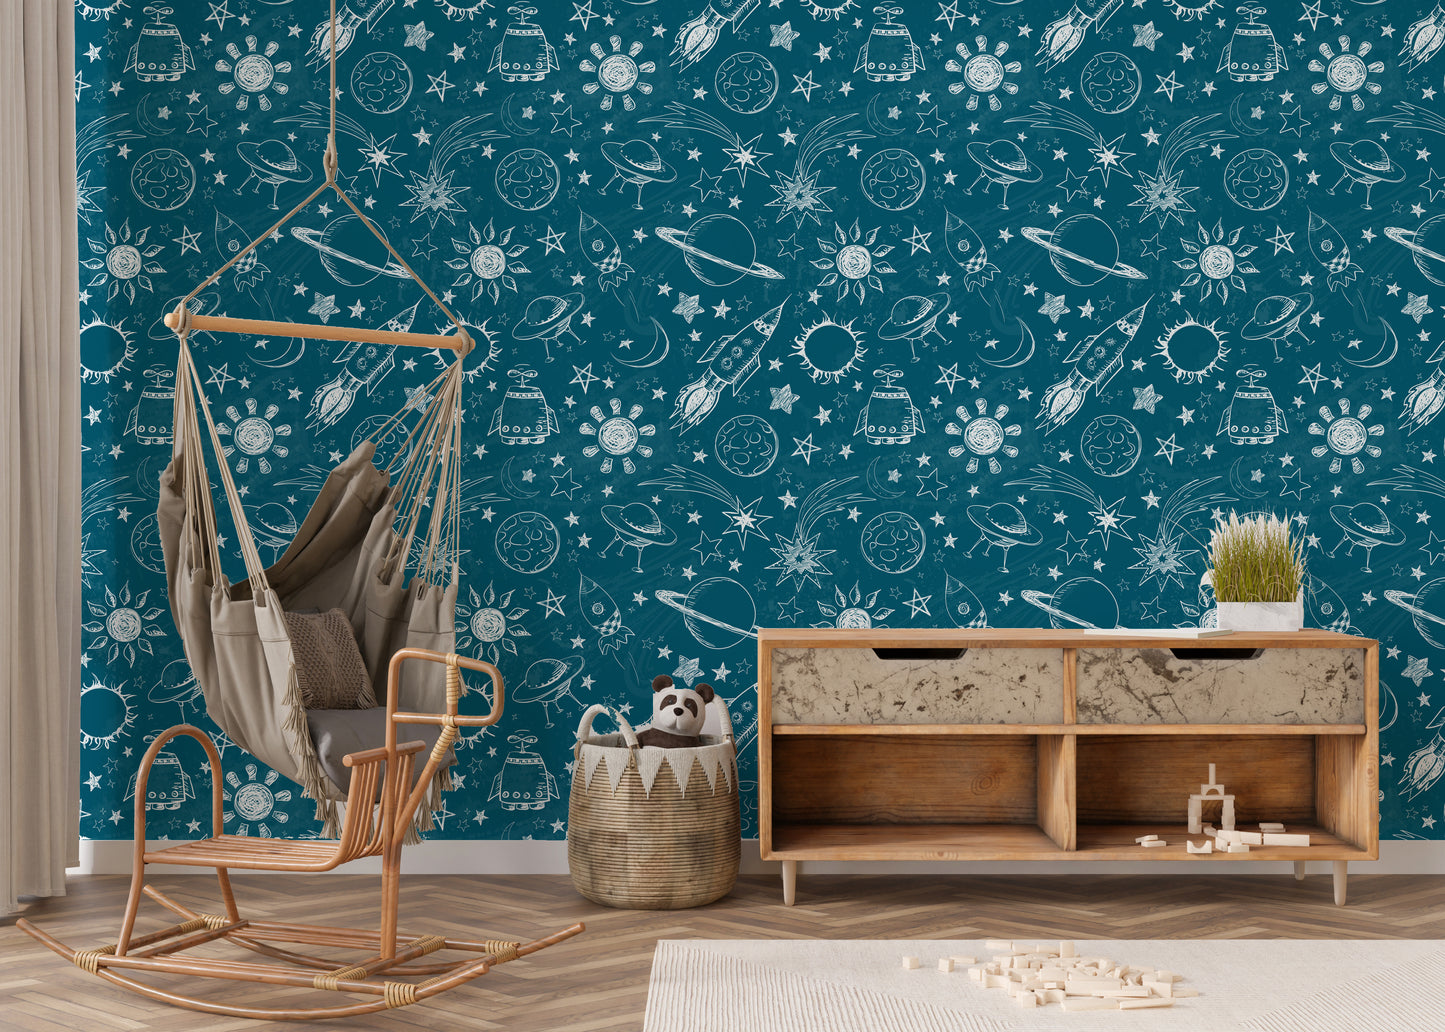 Intergalactic Space Themed Removable Peel And Stick Wallpaper